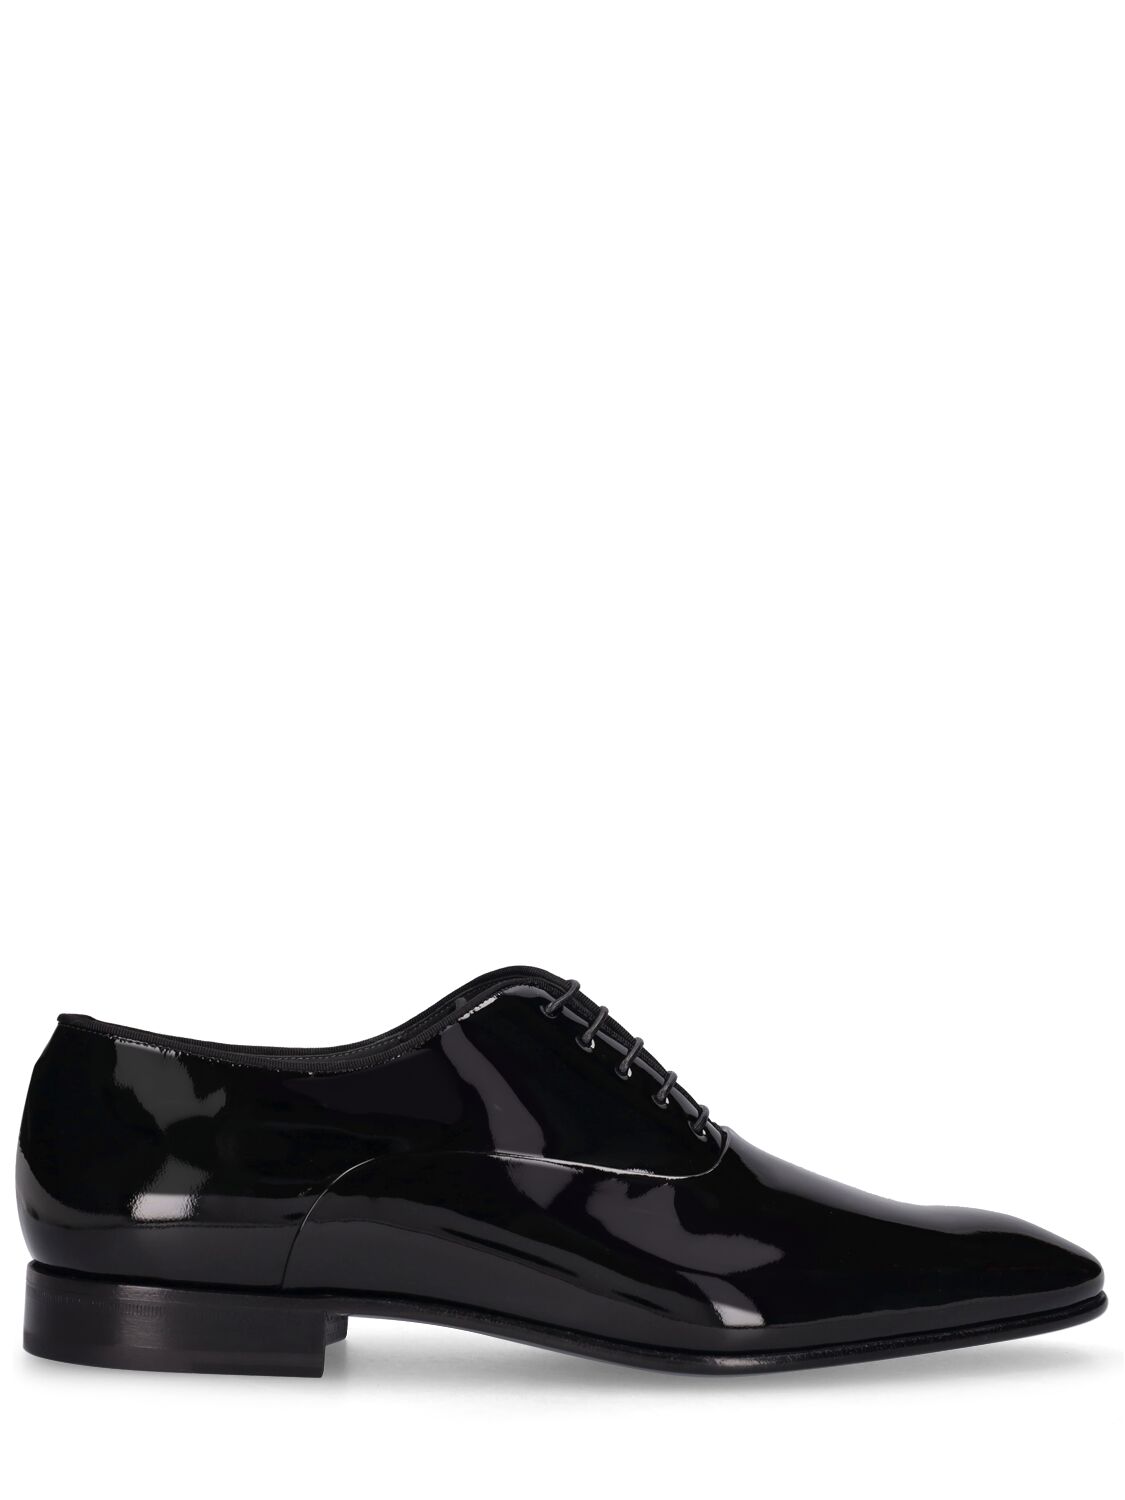 HUGO BOSS PATENT LEATHER OXFORD SHOES